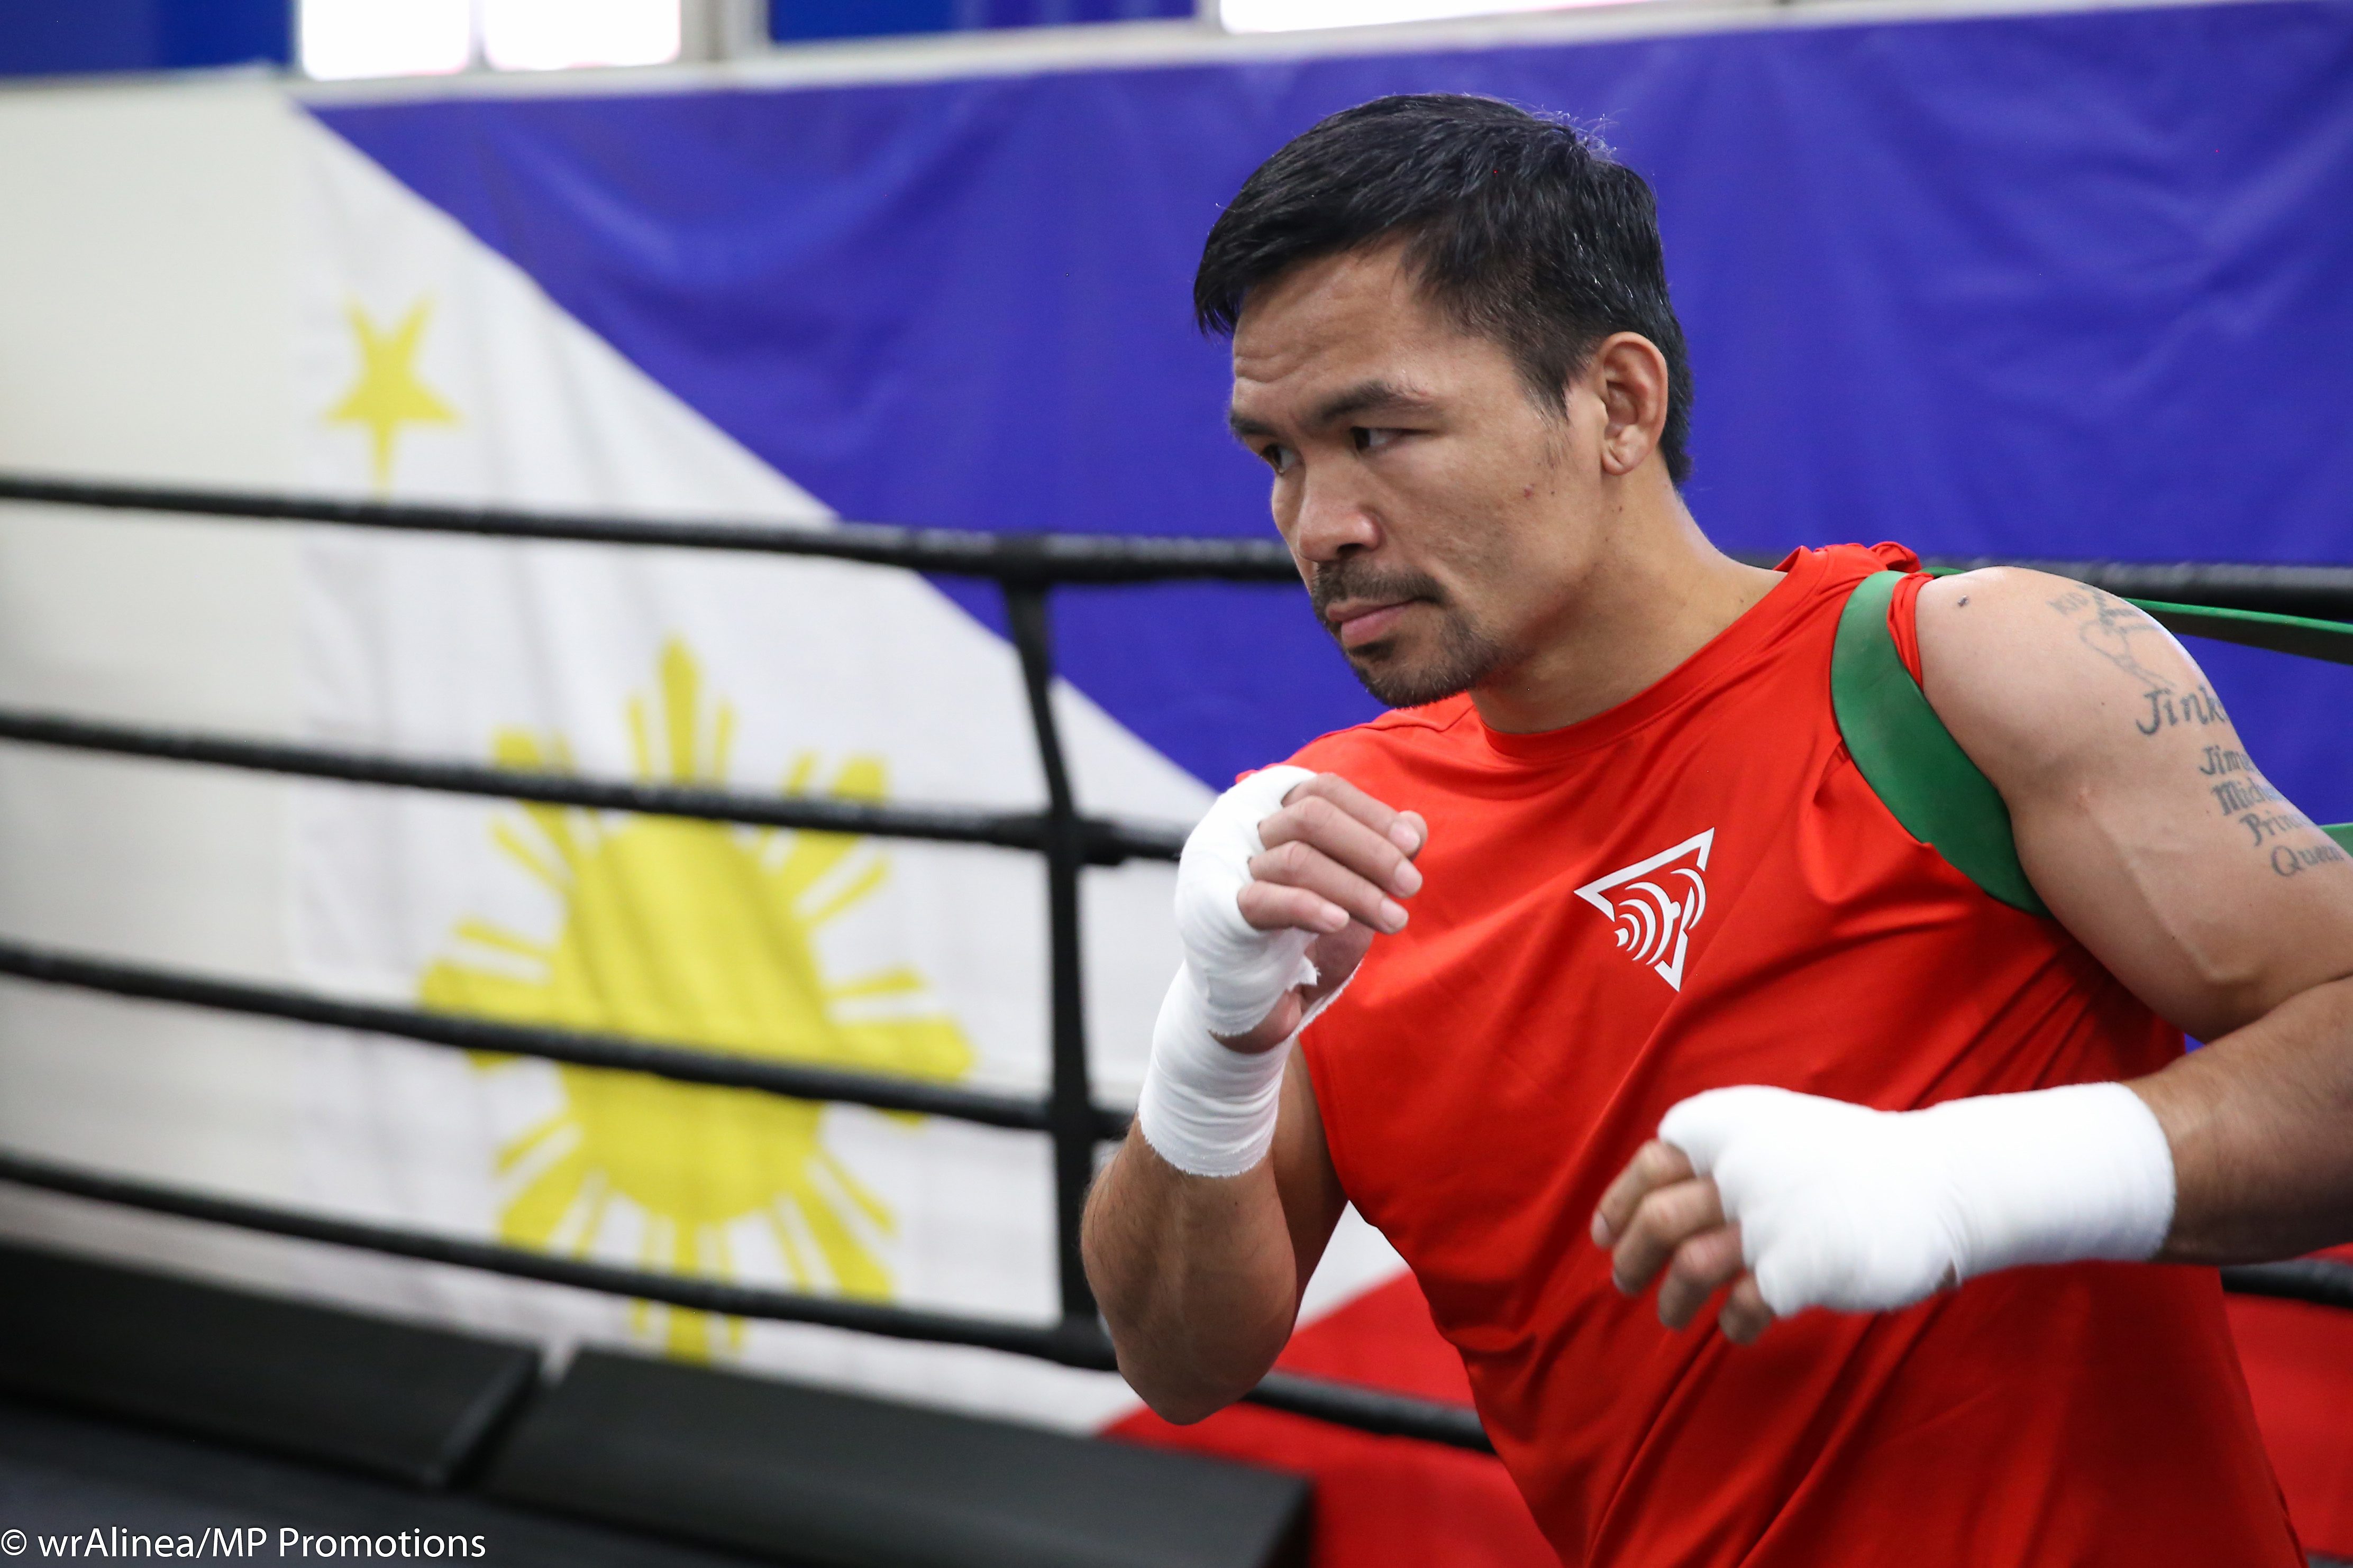 Forming own national party grounds to expel Pacquiao – PDP-Laban exec